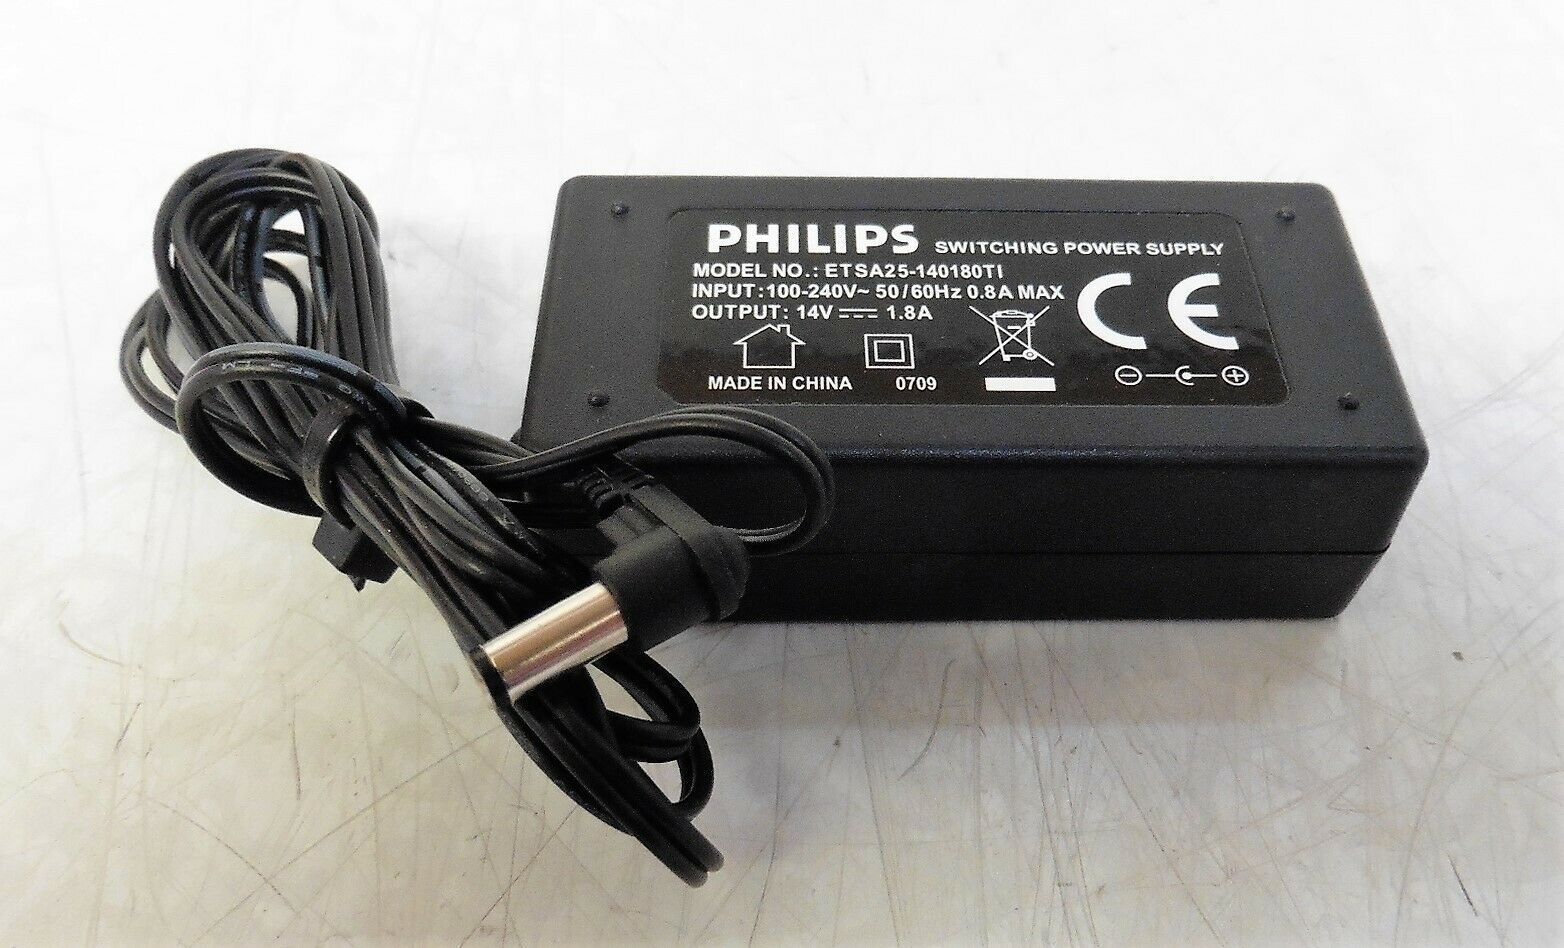 Genuine Philips ETSA25-140180TI 14V 1.8A Power Supply Adapter PS AC/DC Charger Brand: Philips Unit Type: Unit MPN: